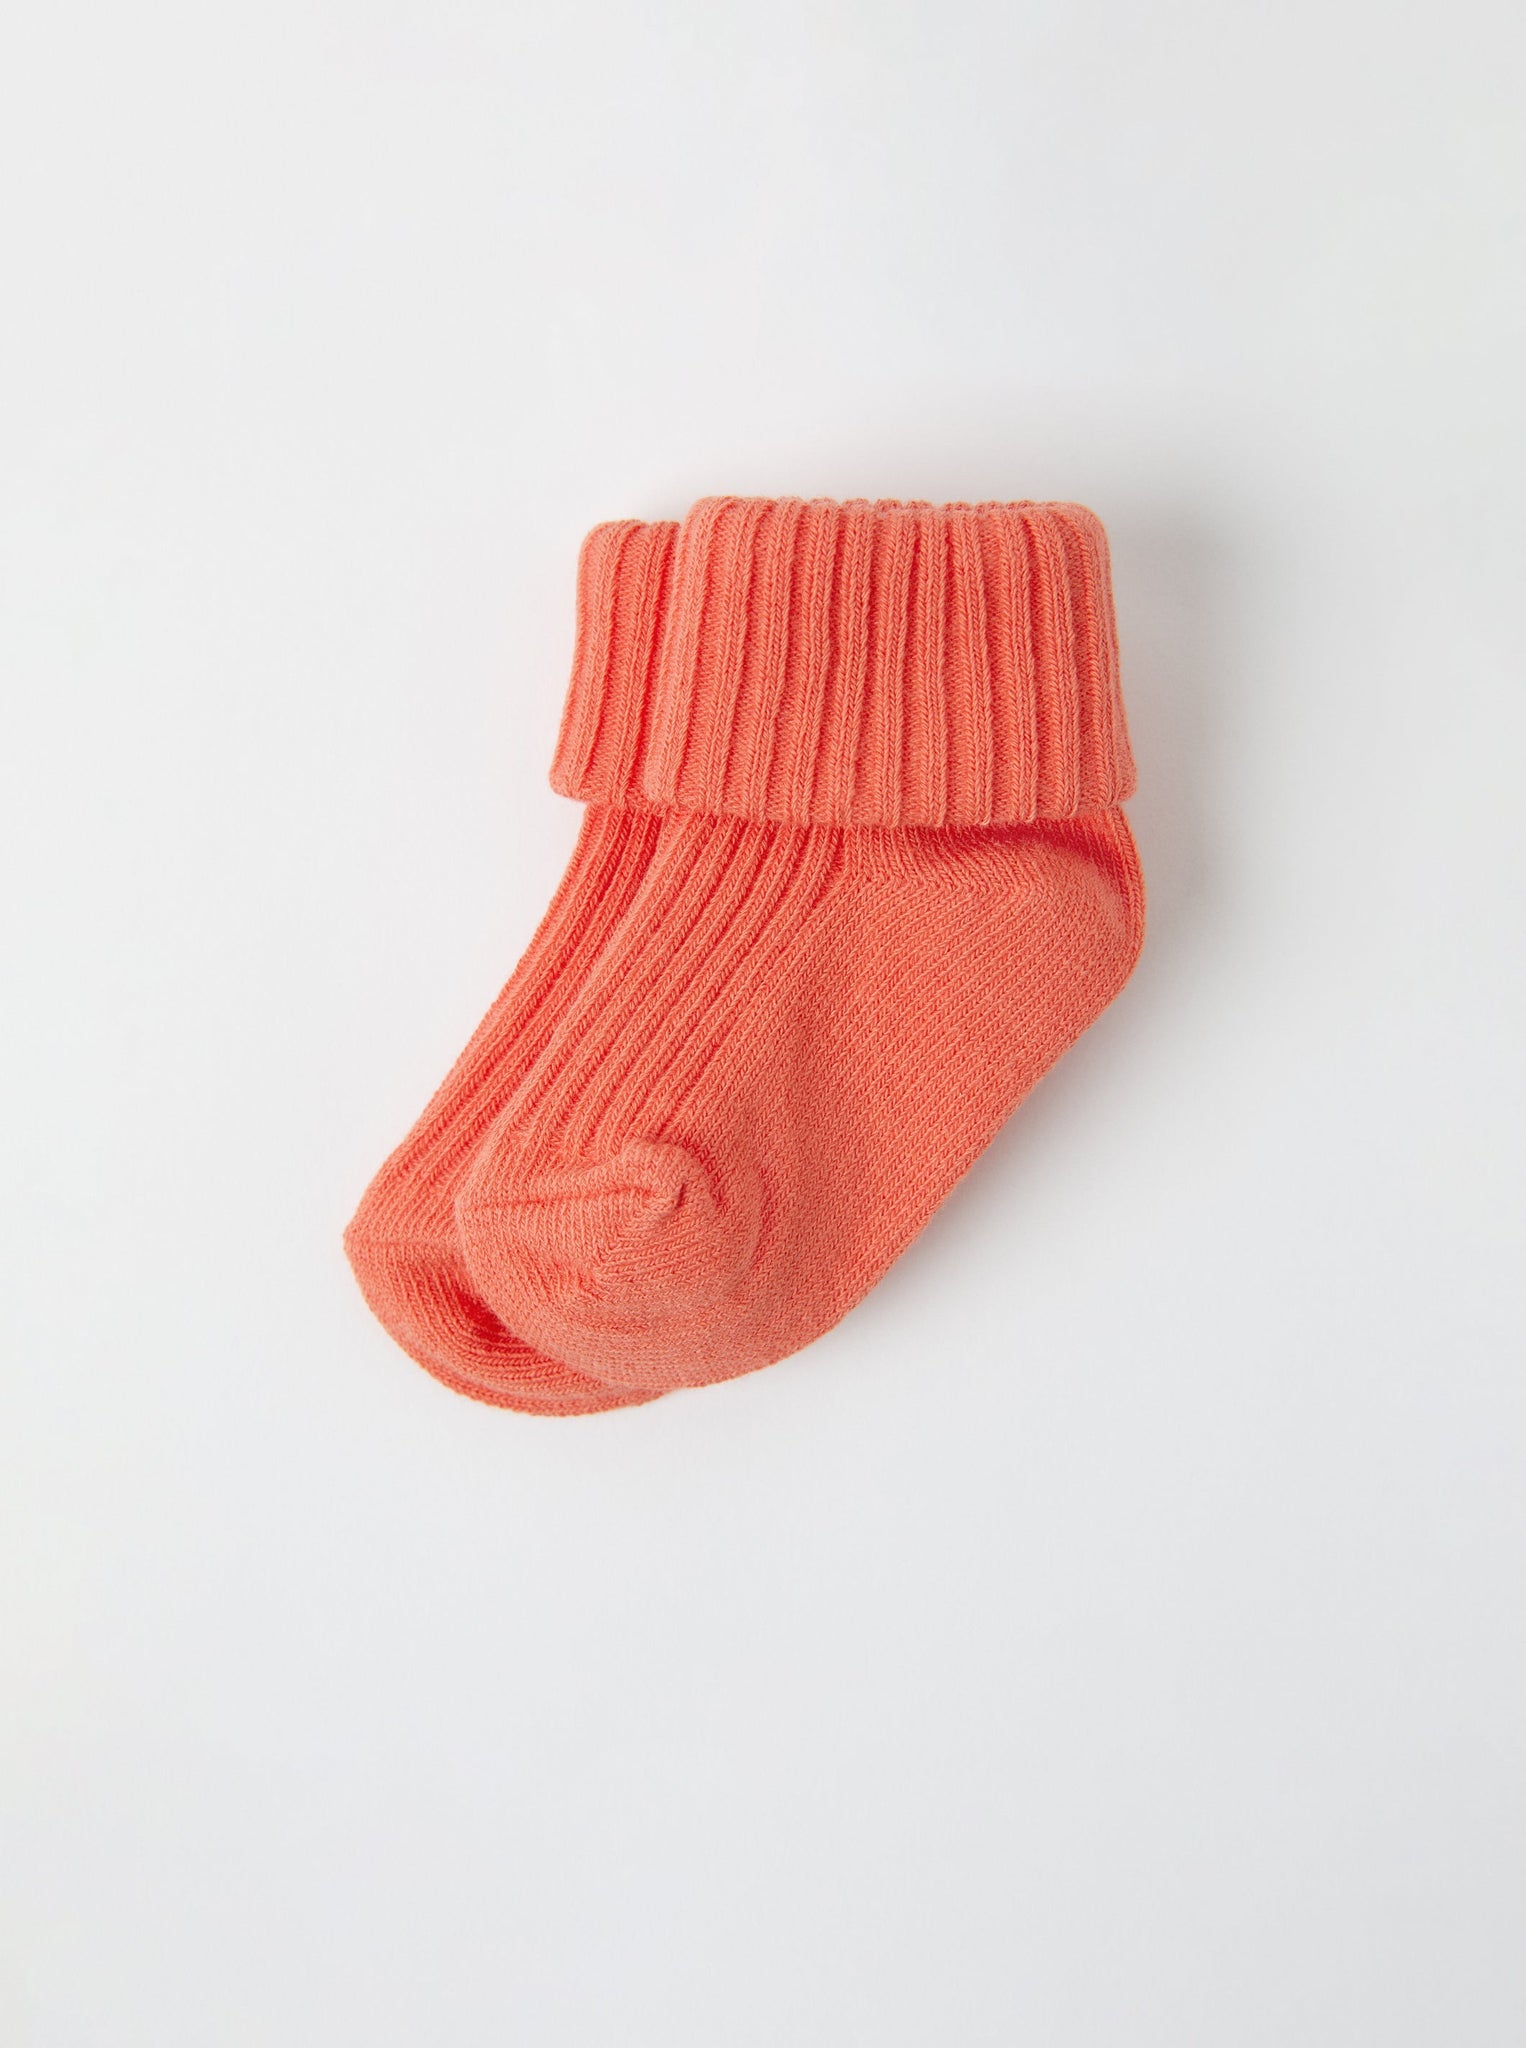 Organic Cotton Orange Baby Socks from the Polarn O. Pyret babywear collection. Clothes made using sustainably sourced materials.